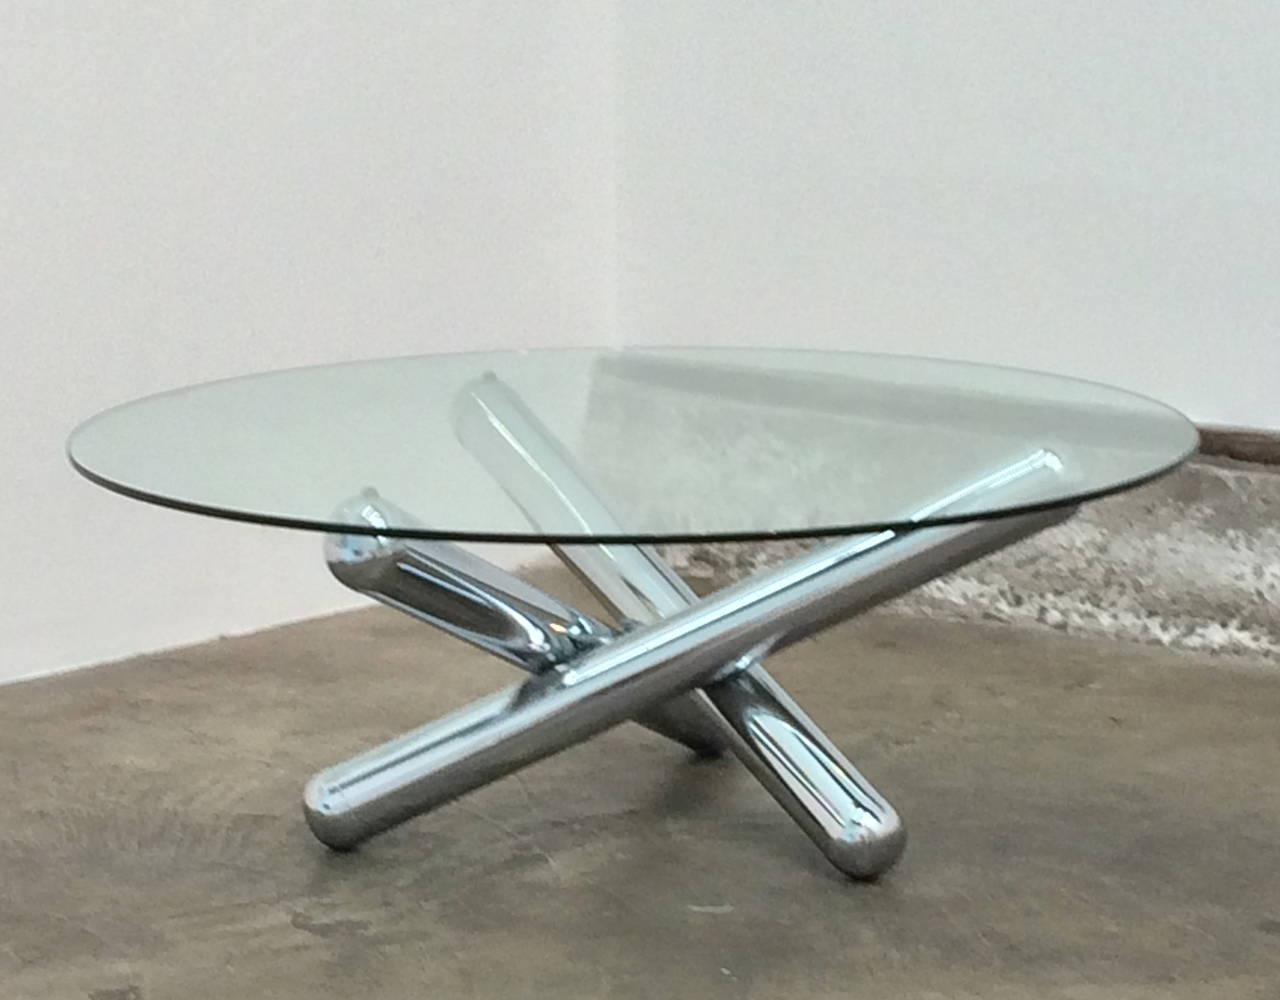 Jax table,
1970s.
Polished, welded chrome base, rubber bumpers, glass top
42 inches in diameter.
15 inches high.
3/8 inch glass.
Excellent condition.